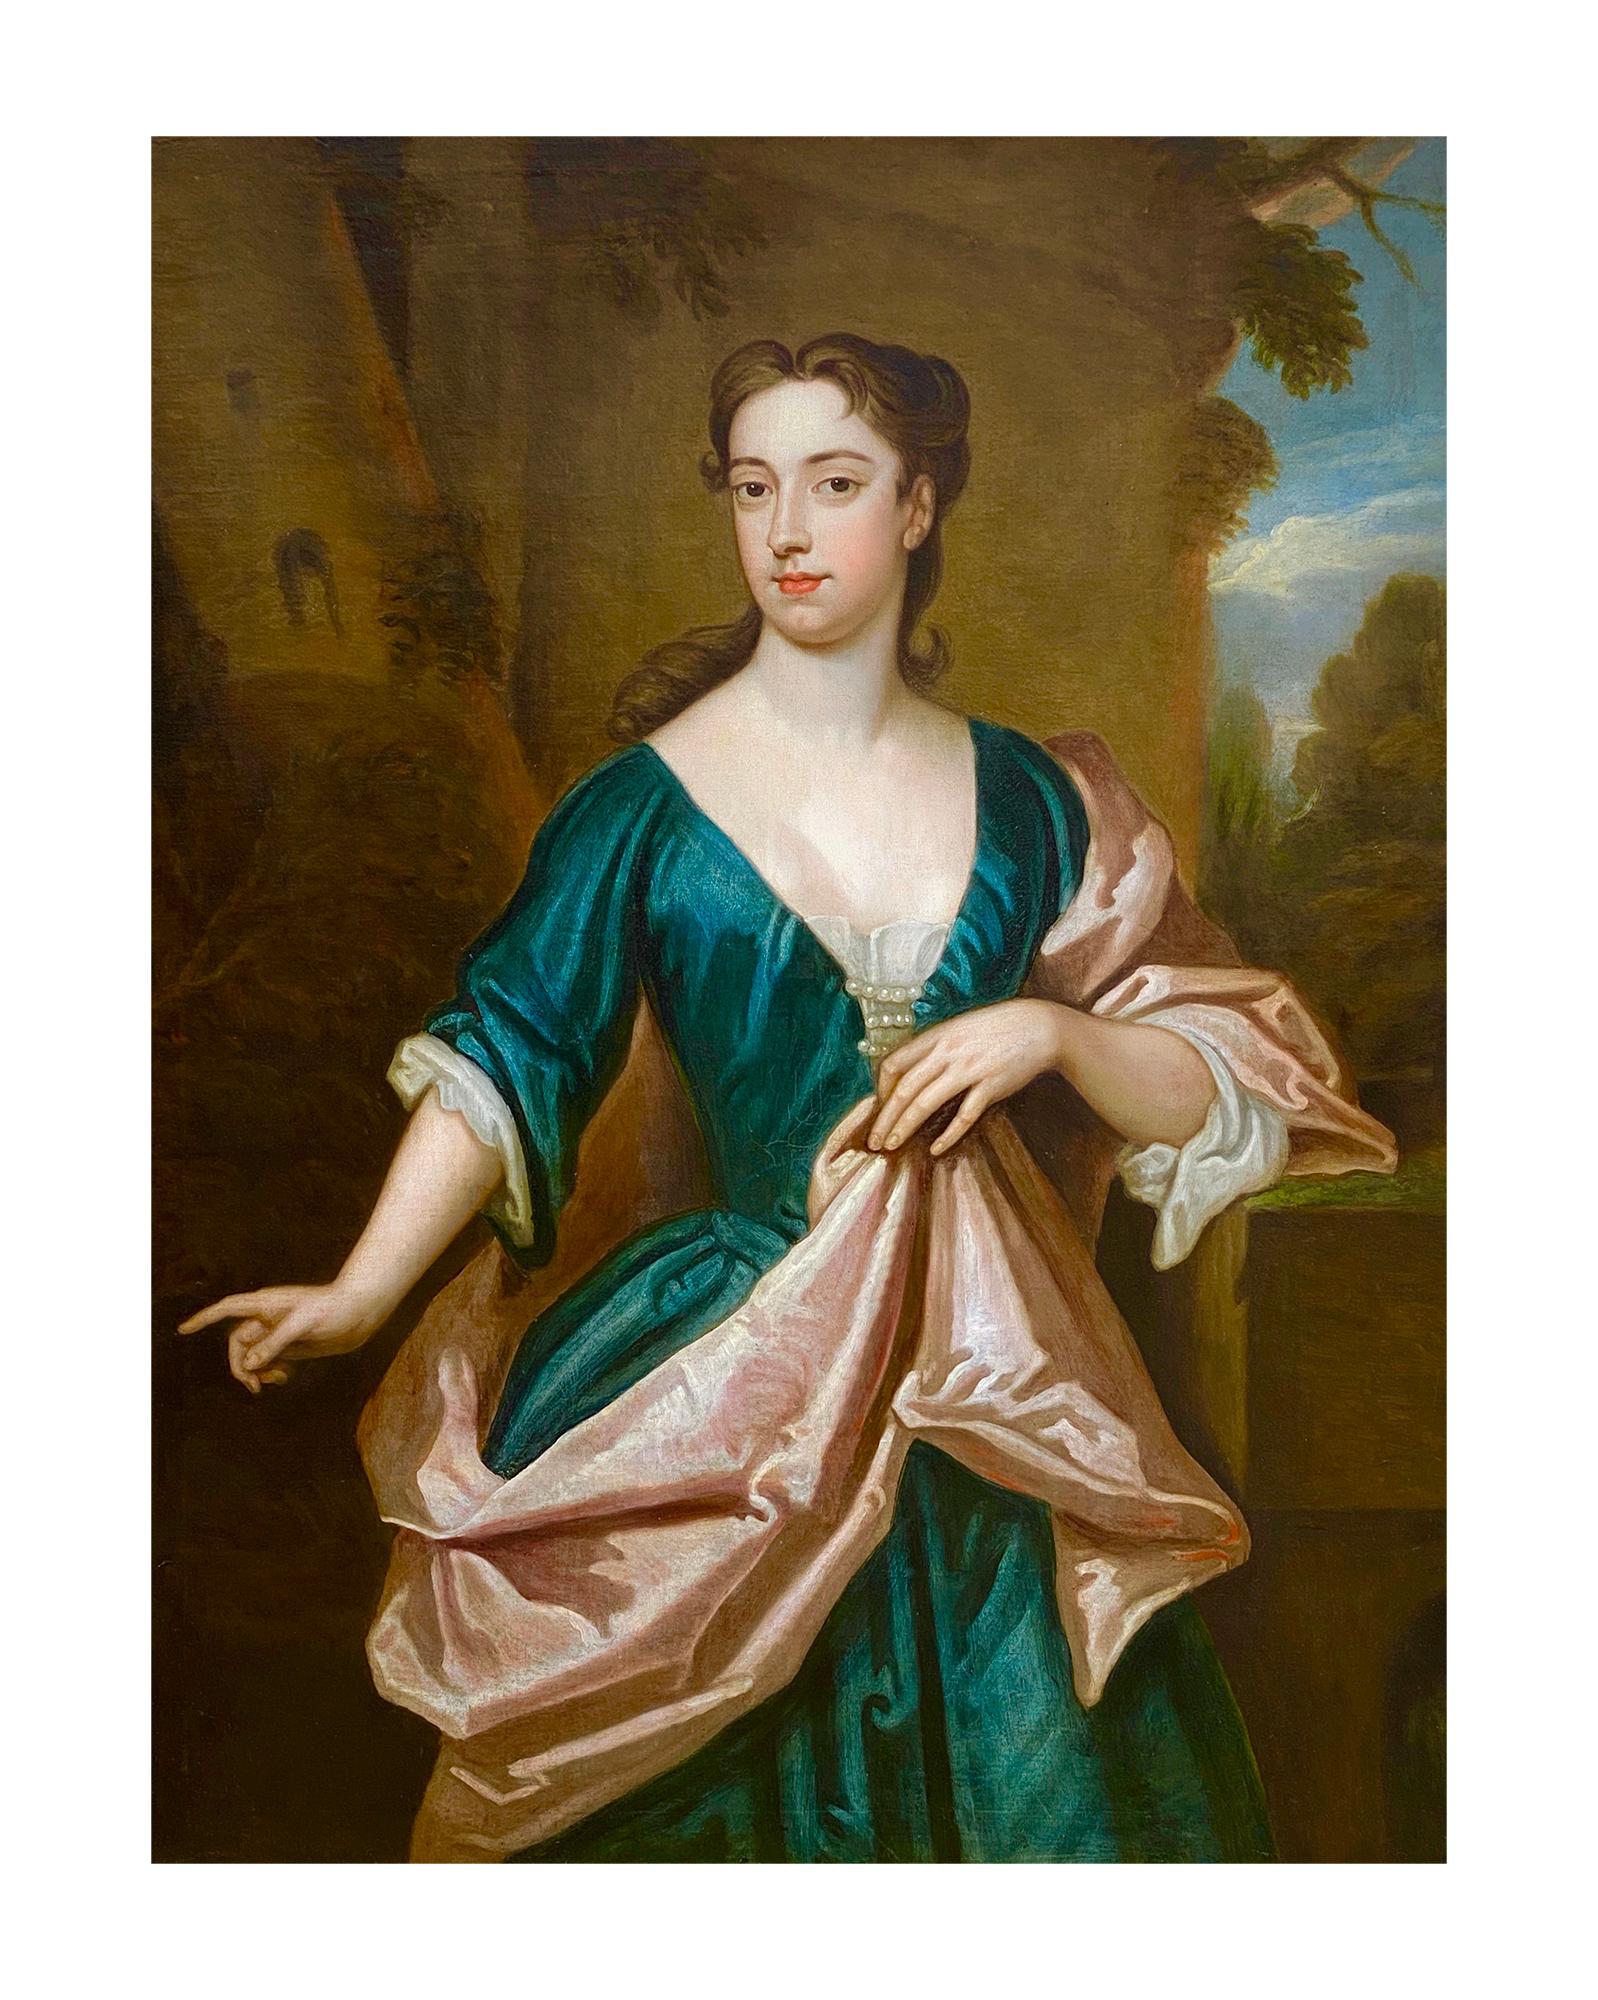 EARLY 18TH CENTURY ENGLISH PORTRAIT OF A LADY - CIRCLE OF SIR GODFREY KNELLER. For Sale 2